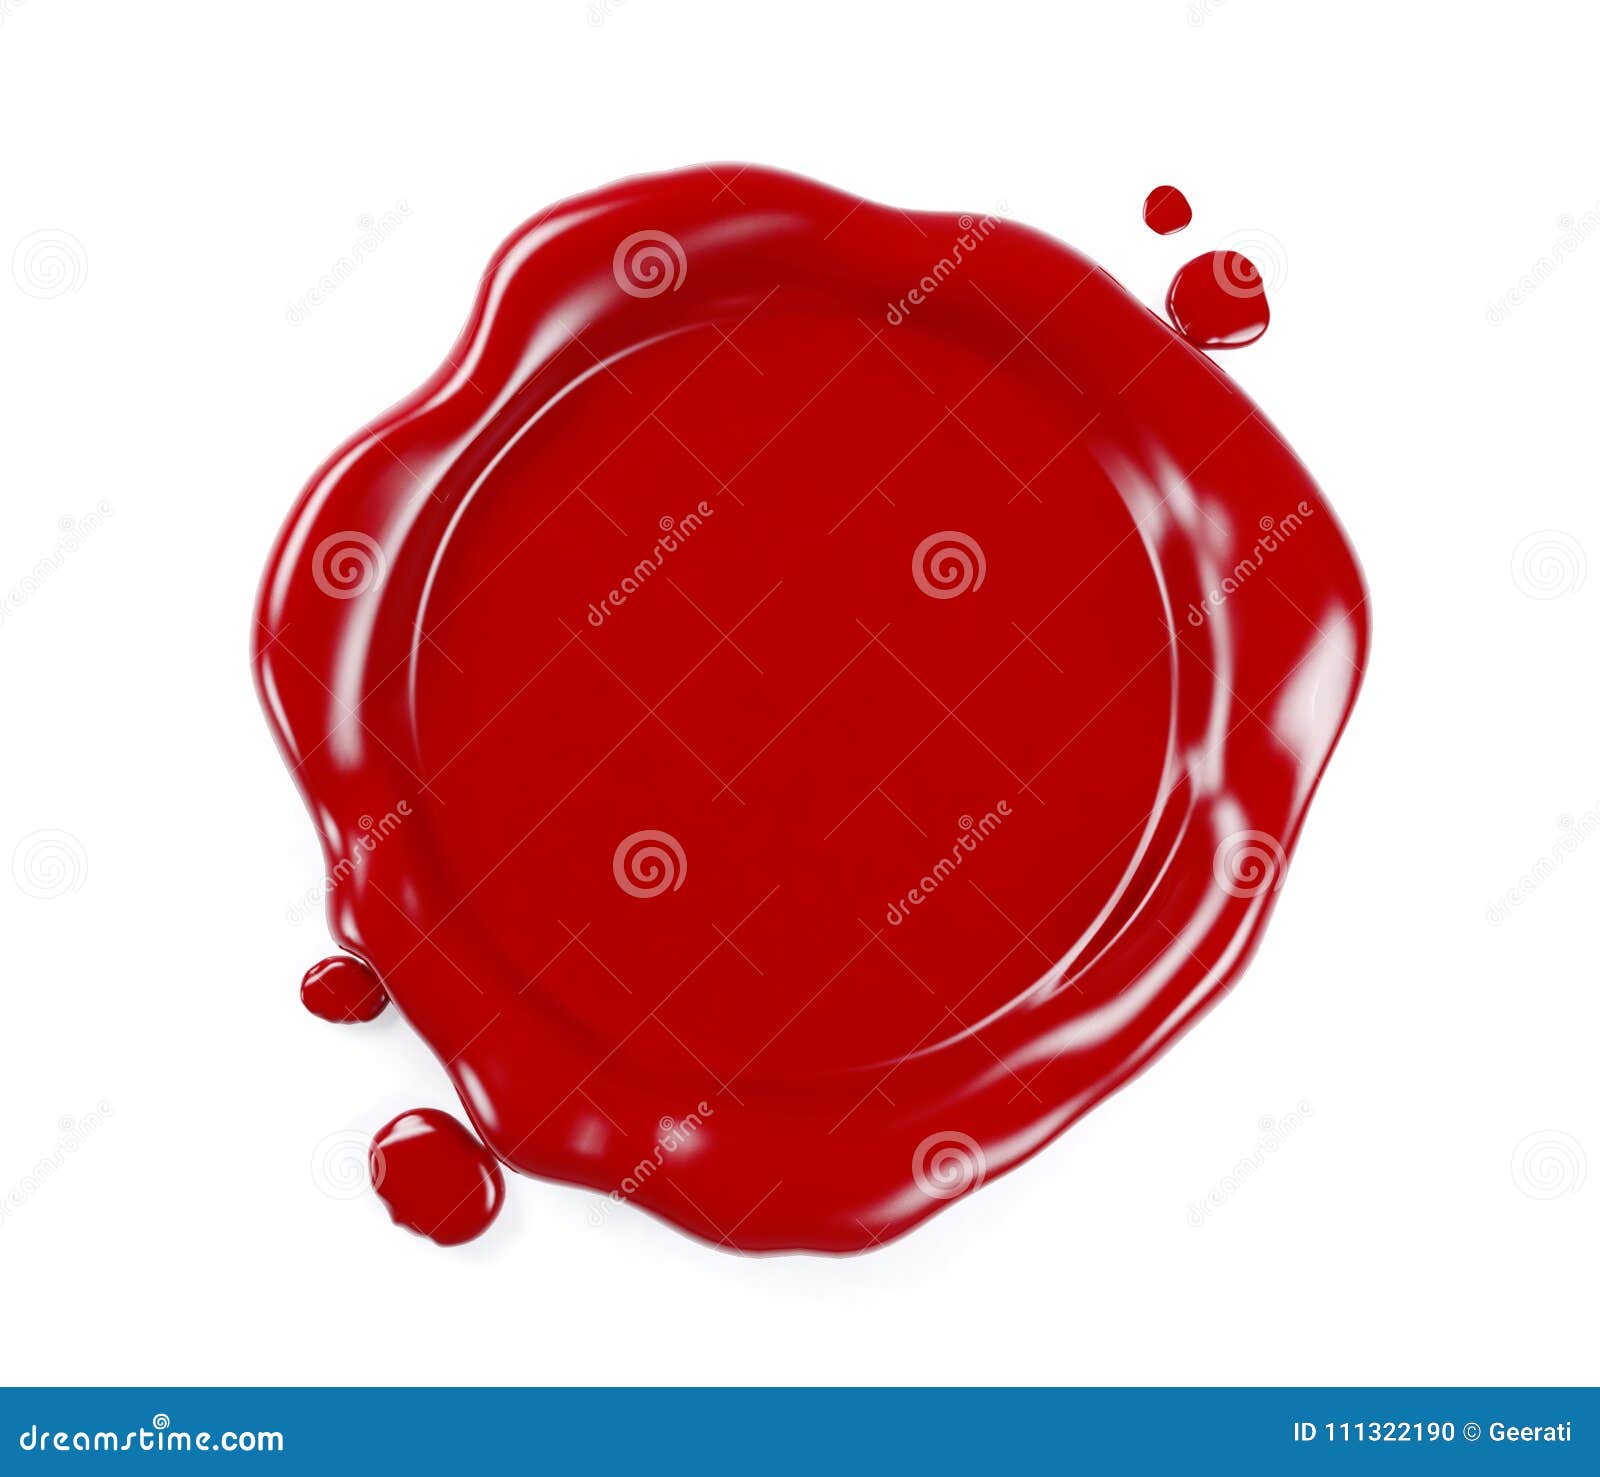 level 3, 3D rendering, a red wax seal Stock Illustration